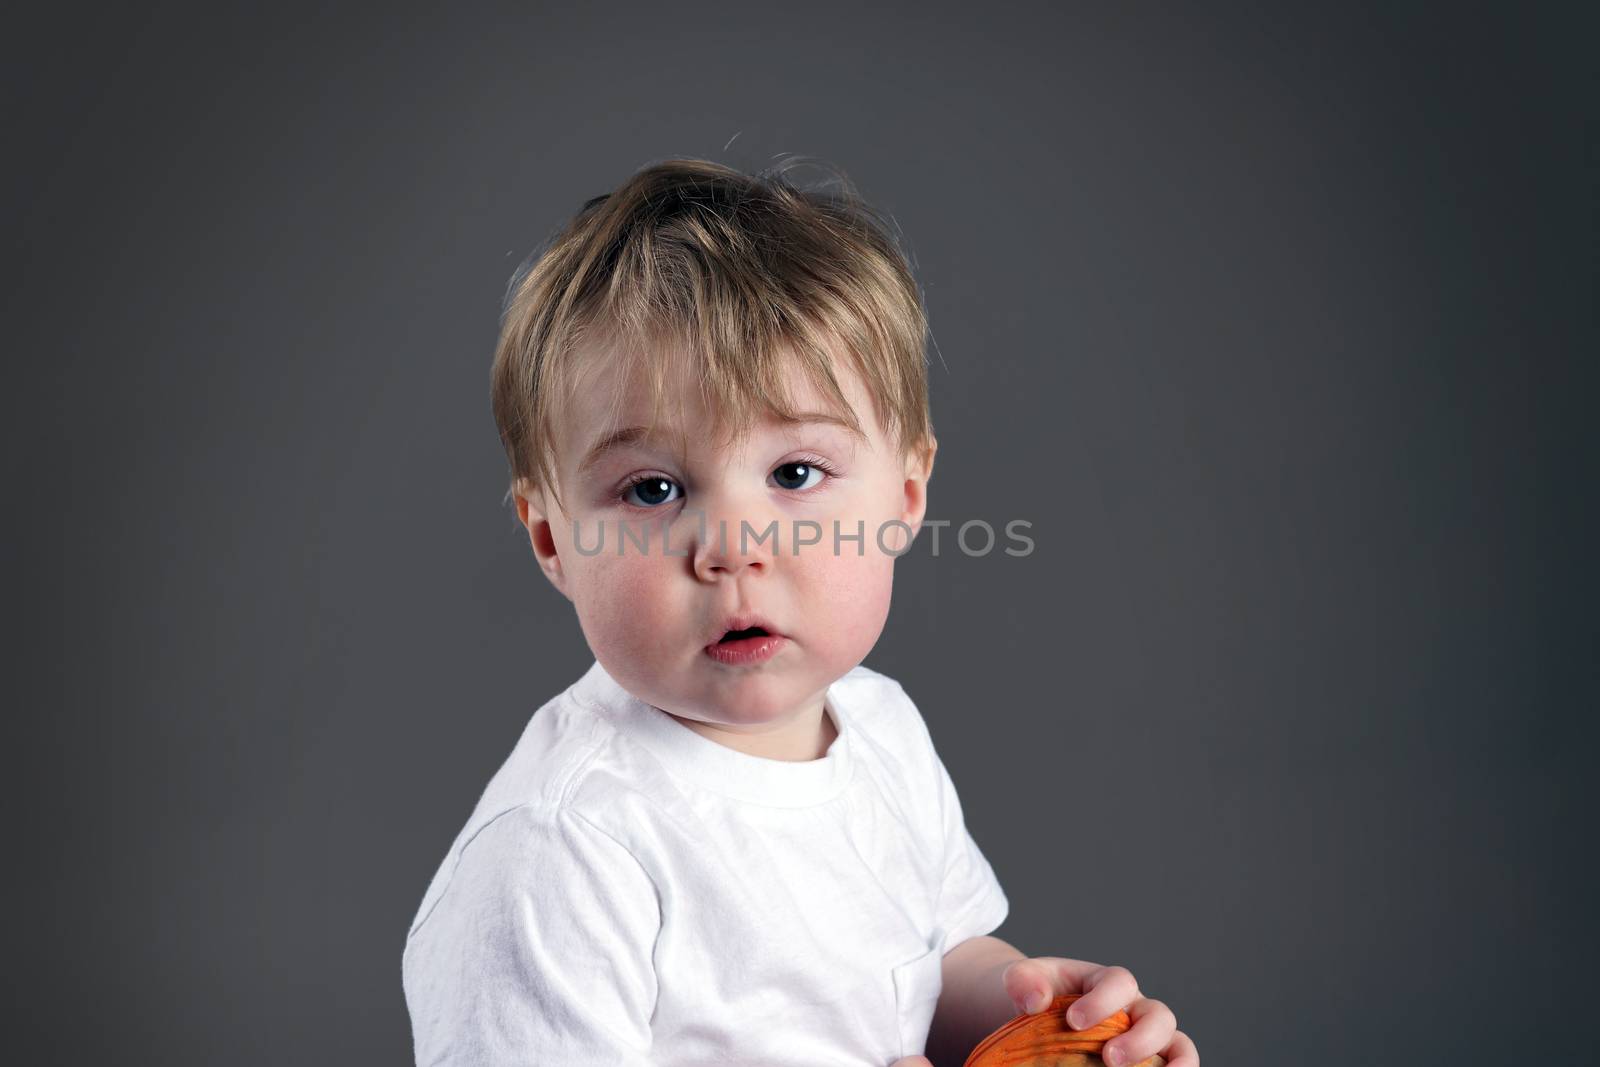 Portrait of little blond boy or toddler looking upset, desaturated on grey background.